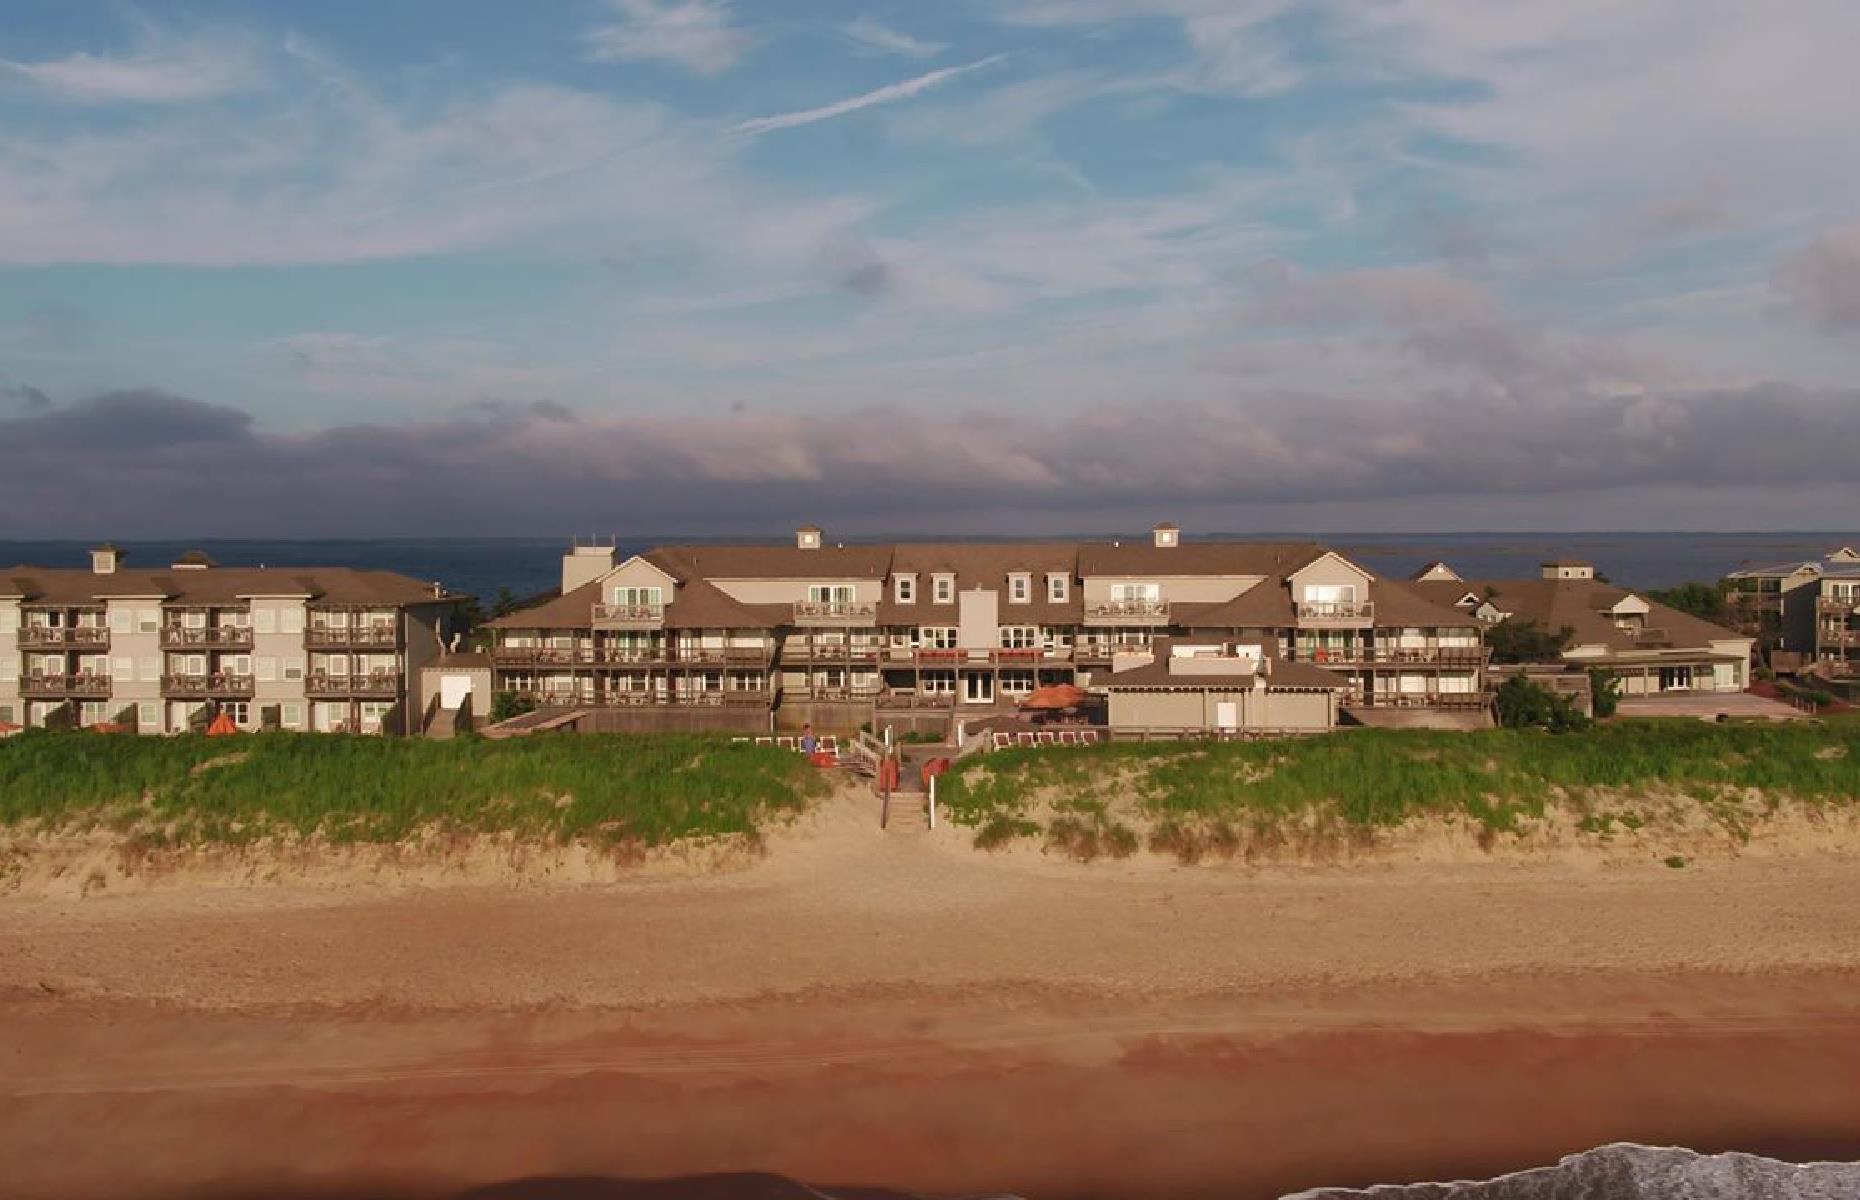 <p>North Dakota’s Outer Banks area isn’t about glossy luxury or beachside glamor – this part of the East Coast is renowned for its natural beauty and relaxed coastal feel. <a href="https://www.sanderling-resort.com">Sanderling</a> offers an idyllic Outer Banks experience, with three pools and a spa for those who want pampering and wild horse tours, dune hang-gliding, biplane tours, wakeboarding and other outdoor adventures for guests who want to make the most of North Dakota.</p>